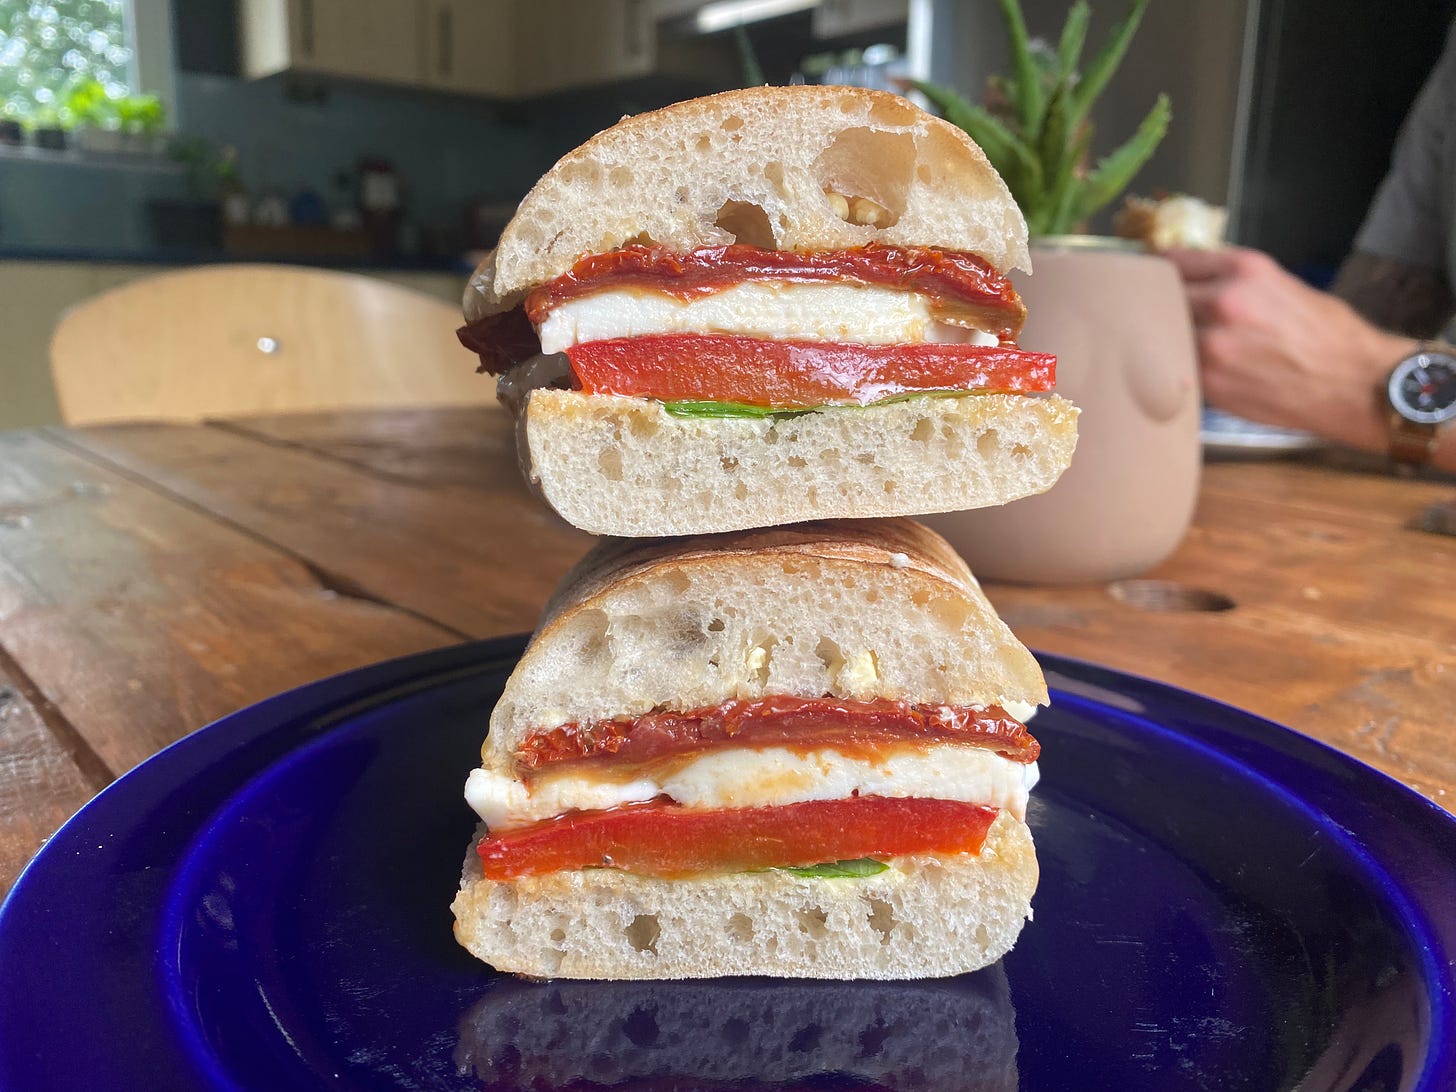 Open side of a panini sandwich showing a filling of mozzarella, sun dried tomato, roasted peppers, basil leaves. Sandwich is on a blue plate on a wooden table. A cactus and a person's arm are in the background